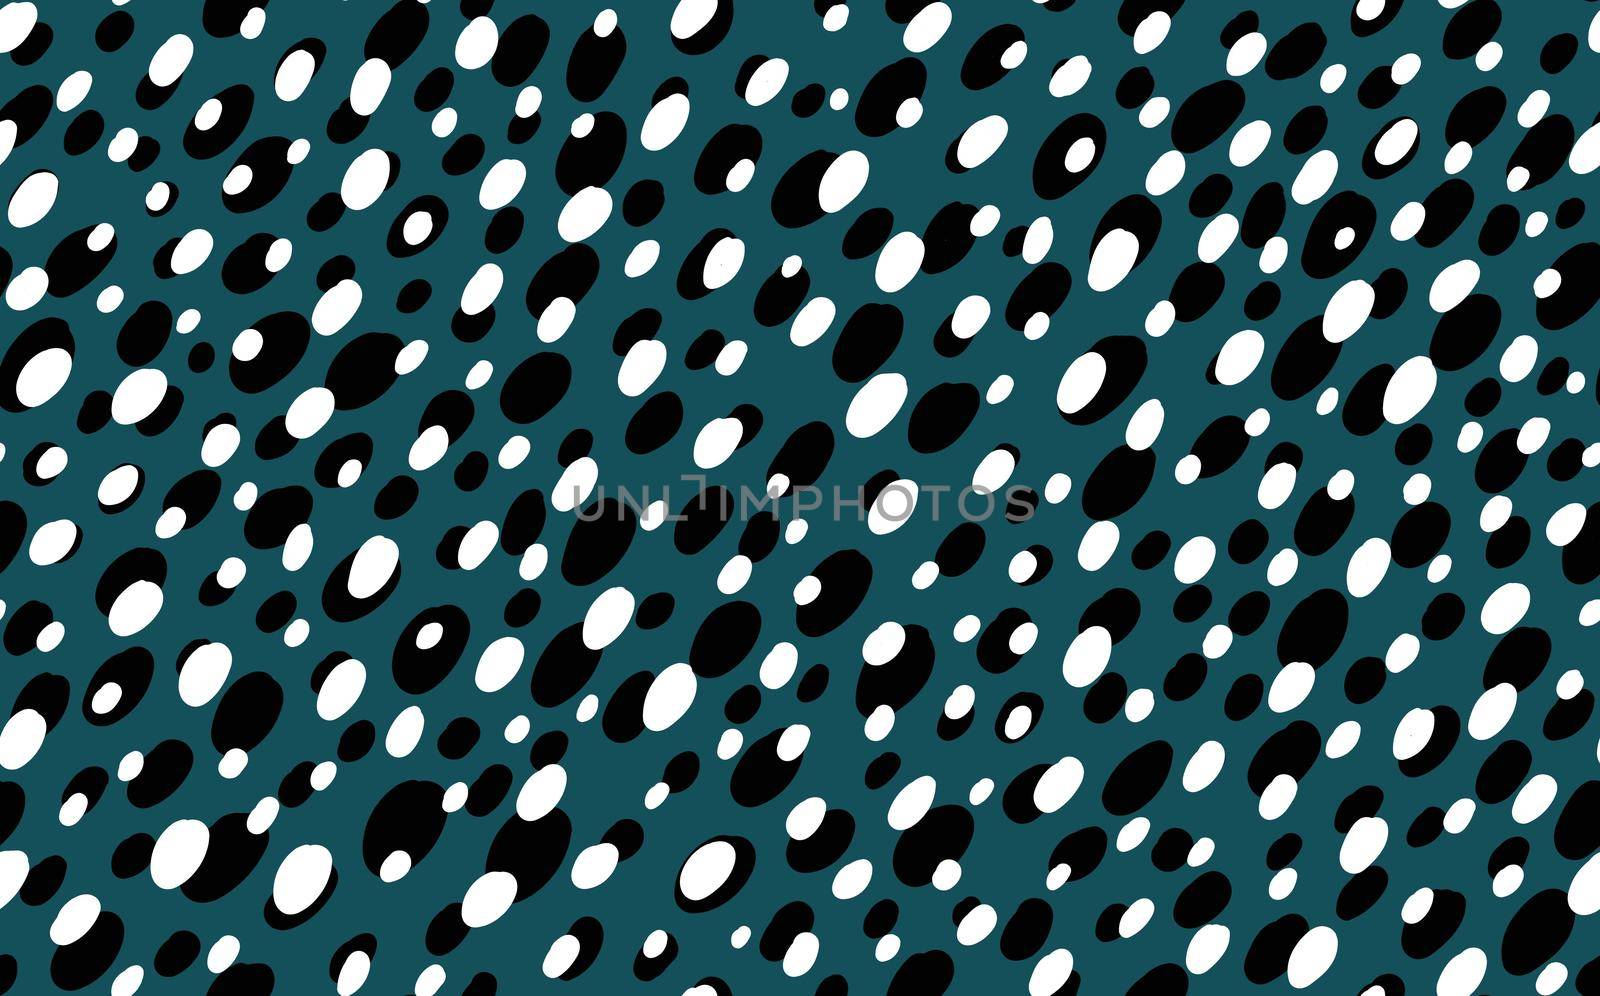 Abstract modern leopard seamless pattern. Animals trendy background. Green and black decorative vector stock illustration for print, card, postcard, fabric, textile. Modern ornament of stylized skin by allaku